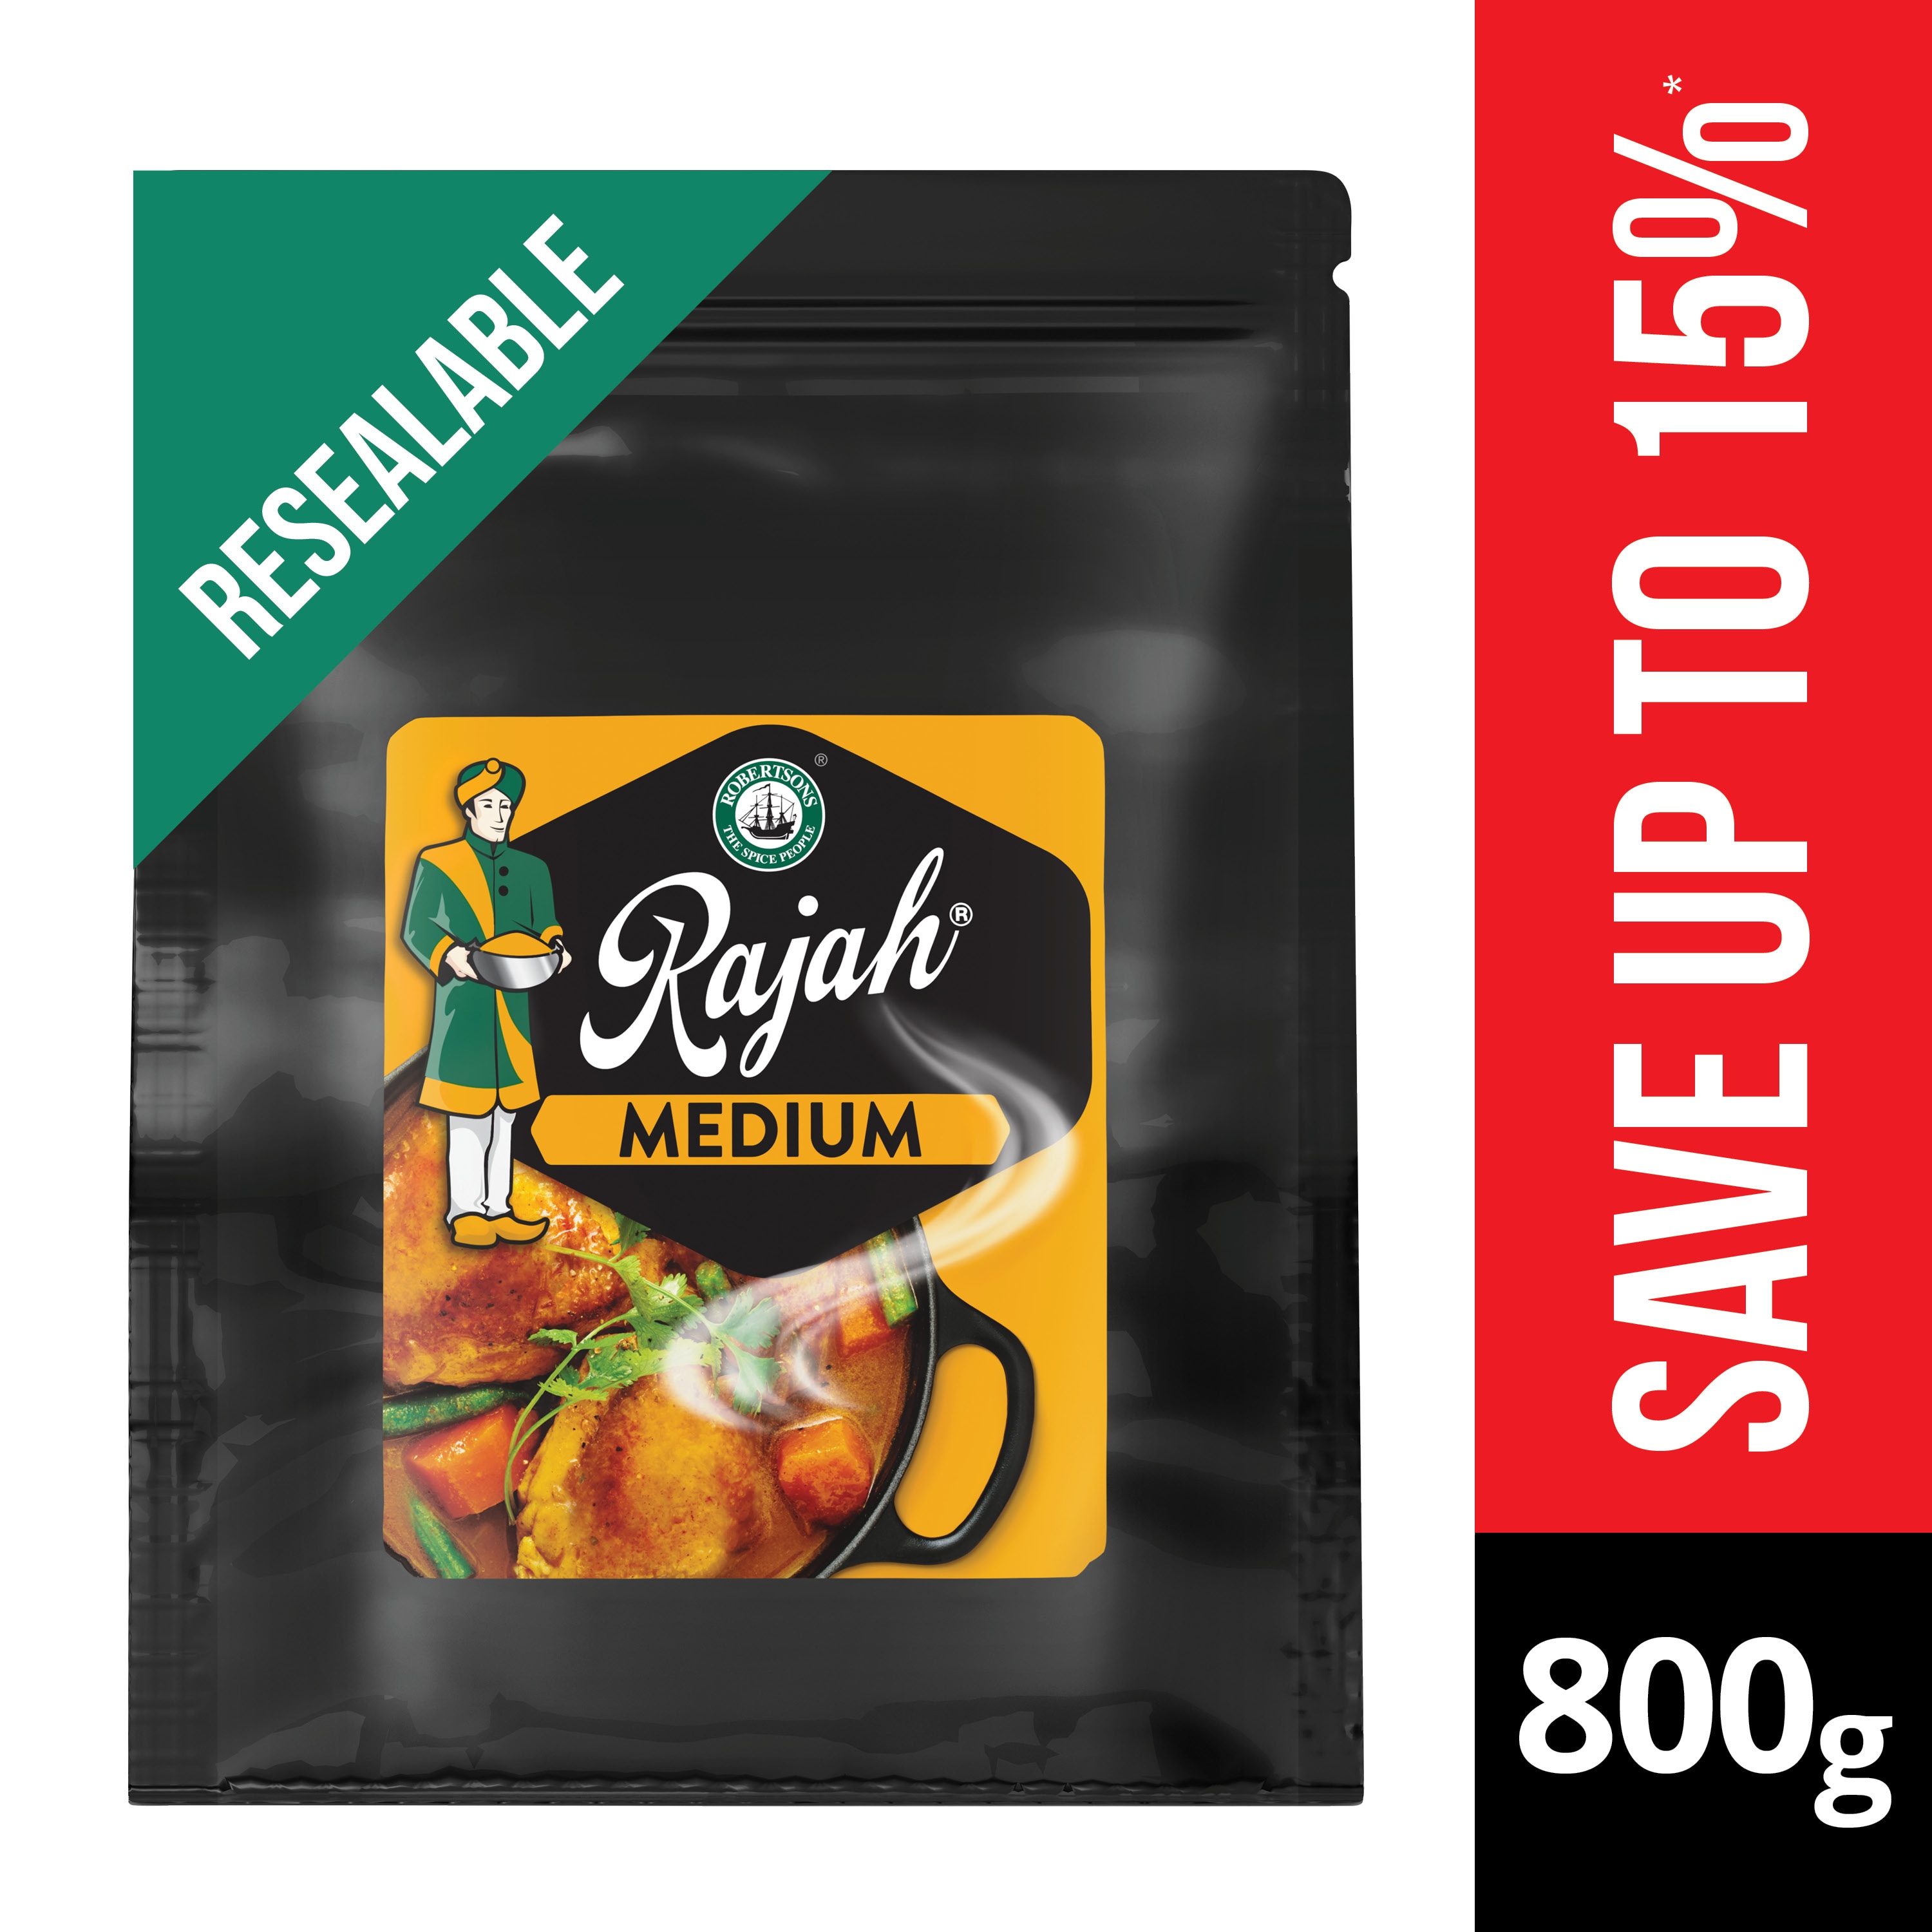 Robertsons Medium Rajah Curry Powder (Pouch) 800 g - Rajah Medium’s blend of herbs and spices delivers the flavour, aroma and colour my guests love.